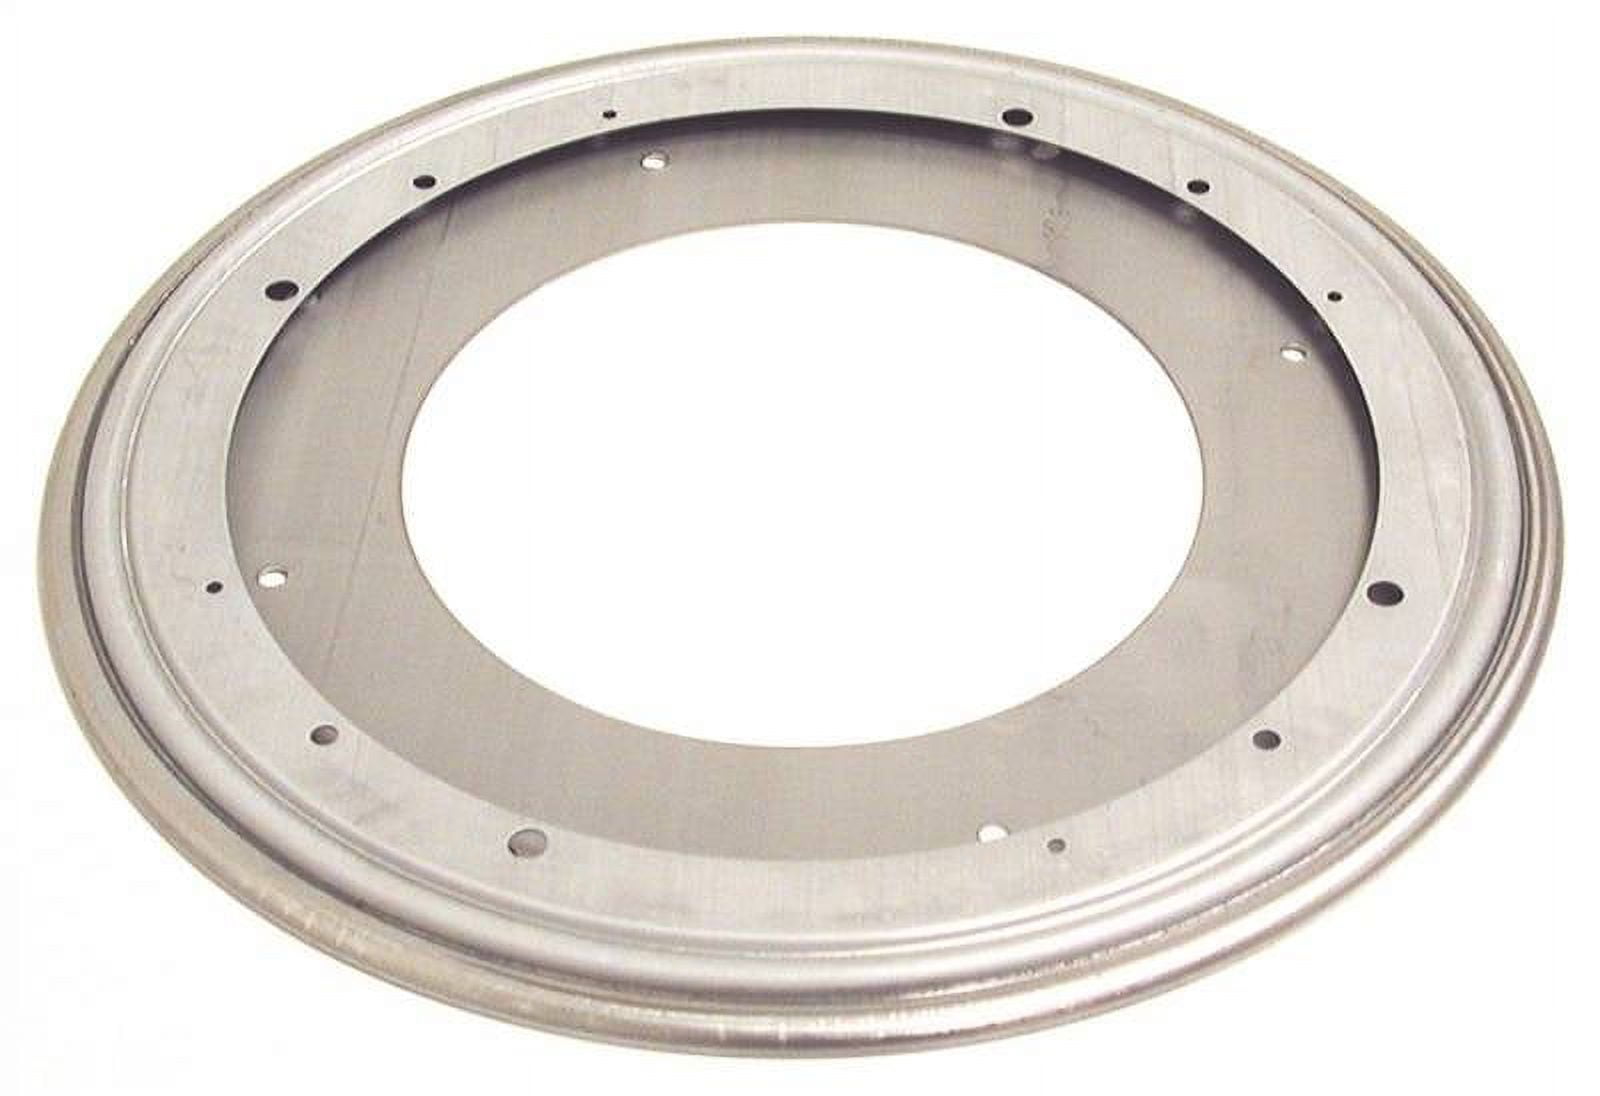 KingLan 12 inch Heavy Duty Steel Paresseux Susan Portant 1000 LB Round  Turntable Bearing Plate : : Bricolage